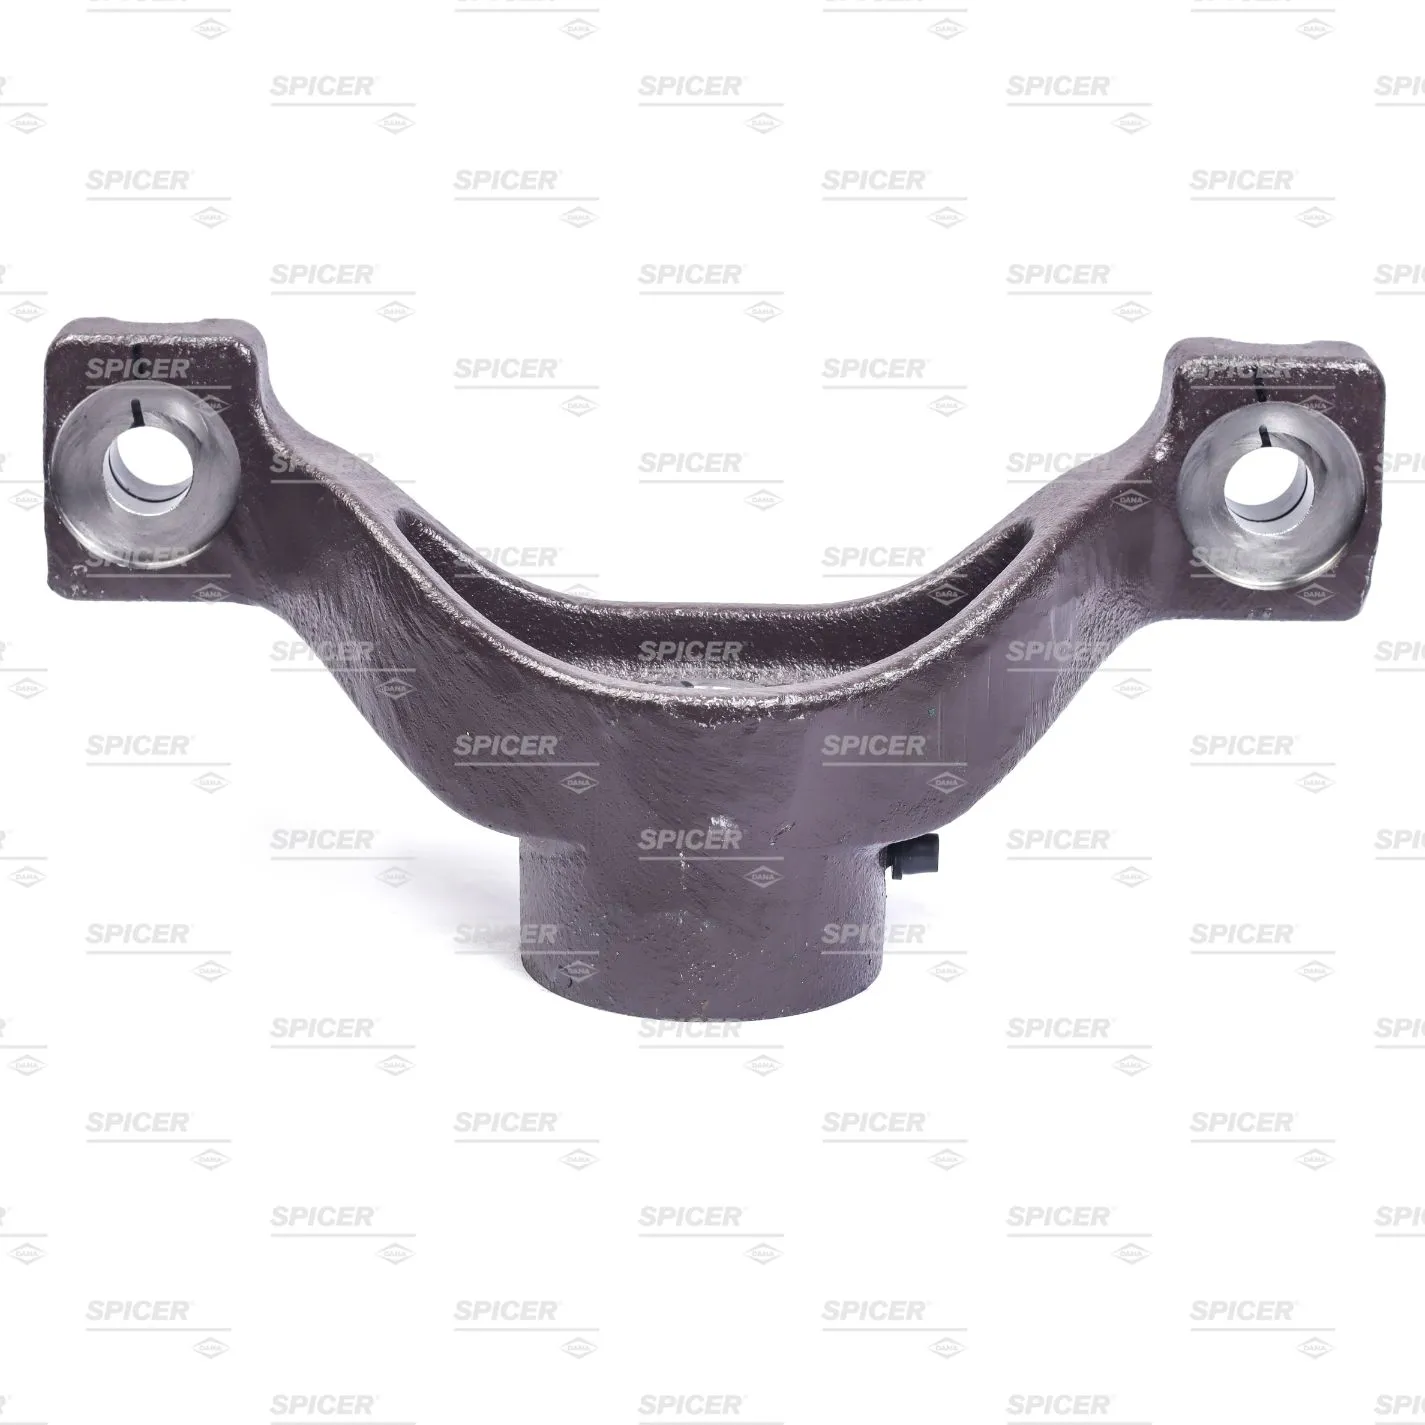 Spicer + Axle + Steering Components + Trunnion Assy - Rear + S20TU111-X_SP + shop